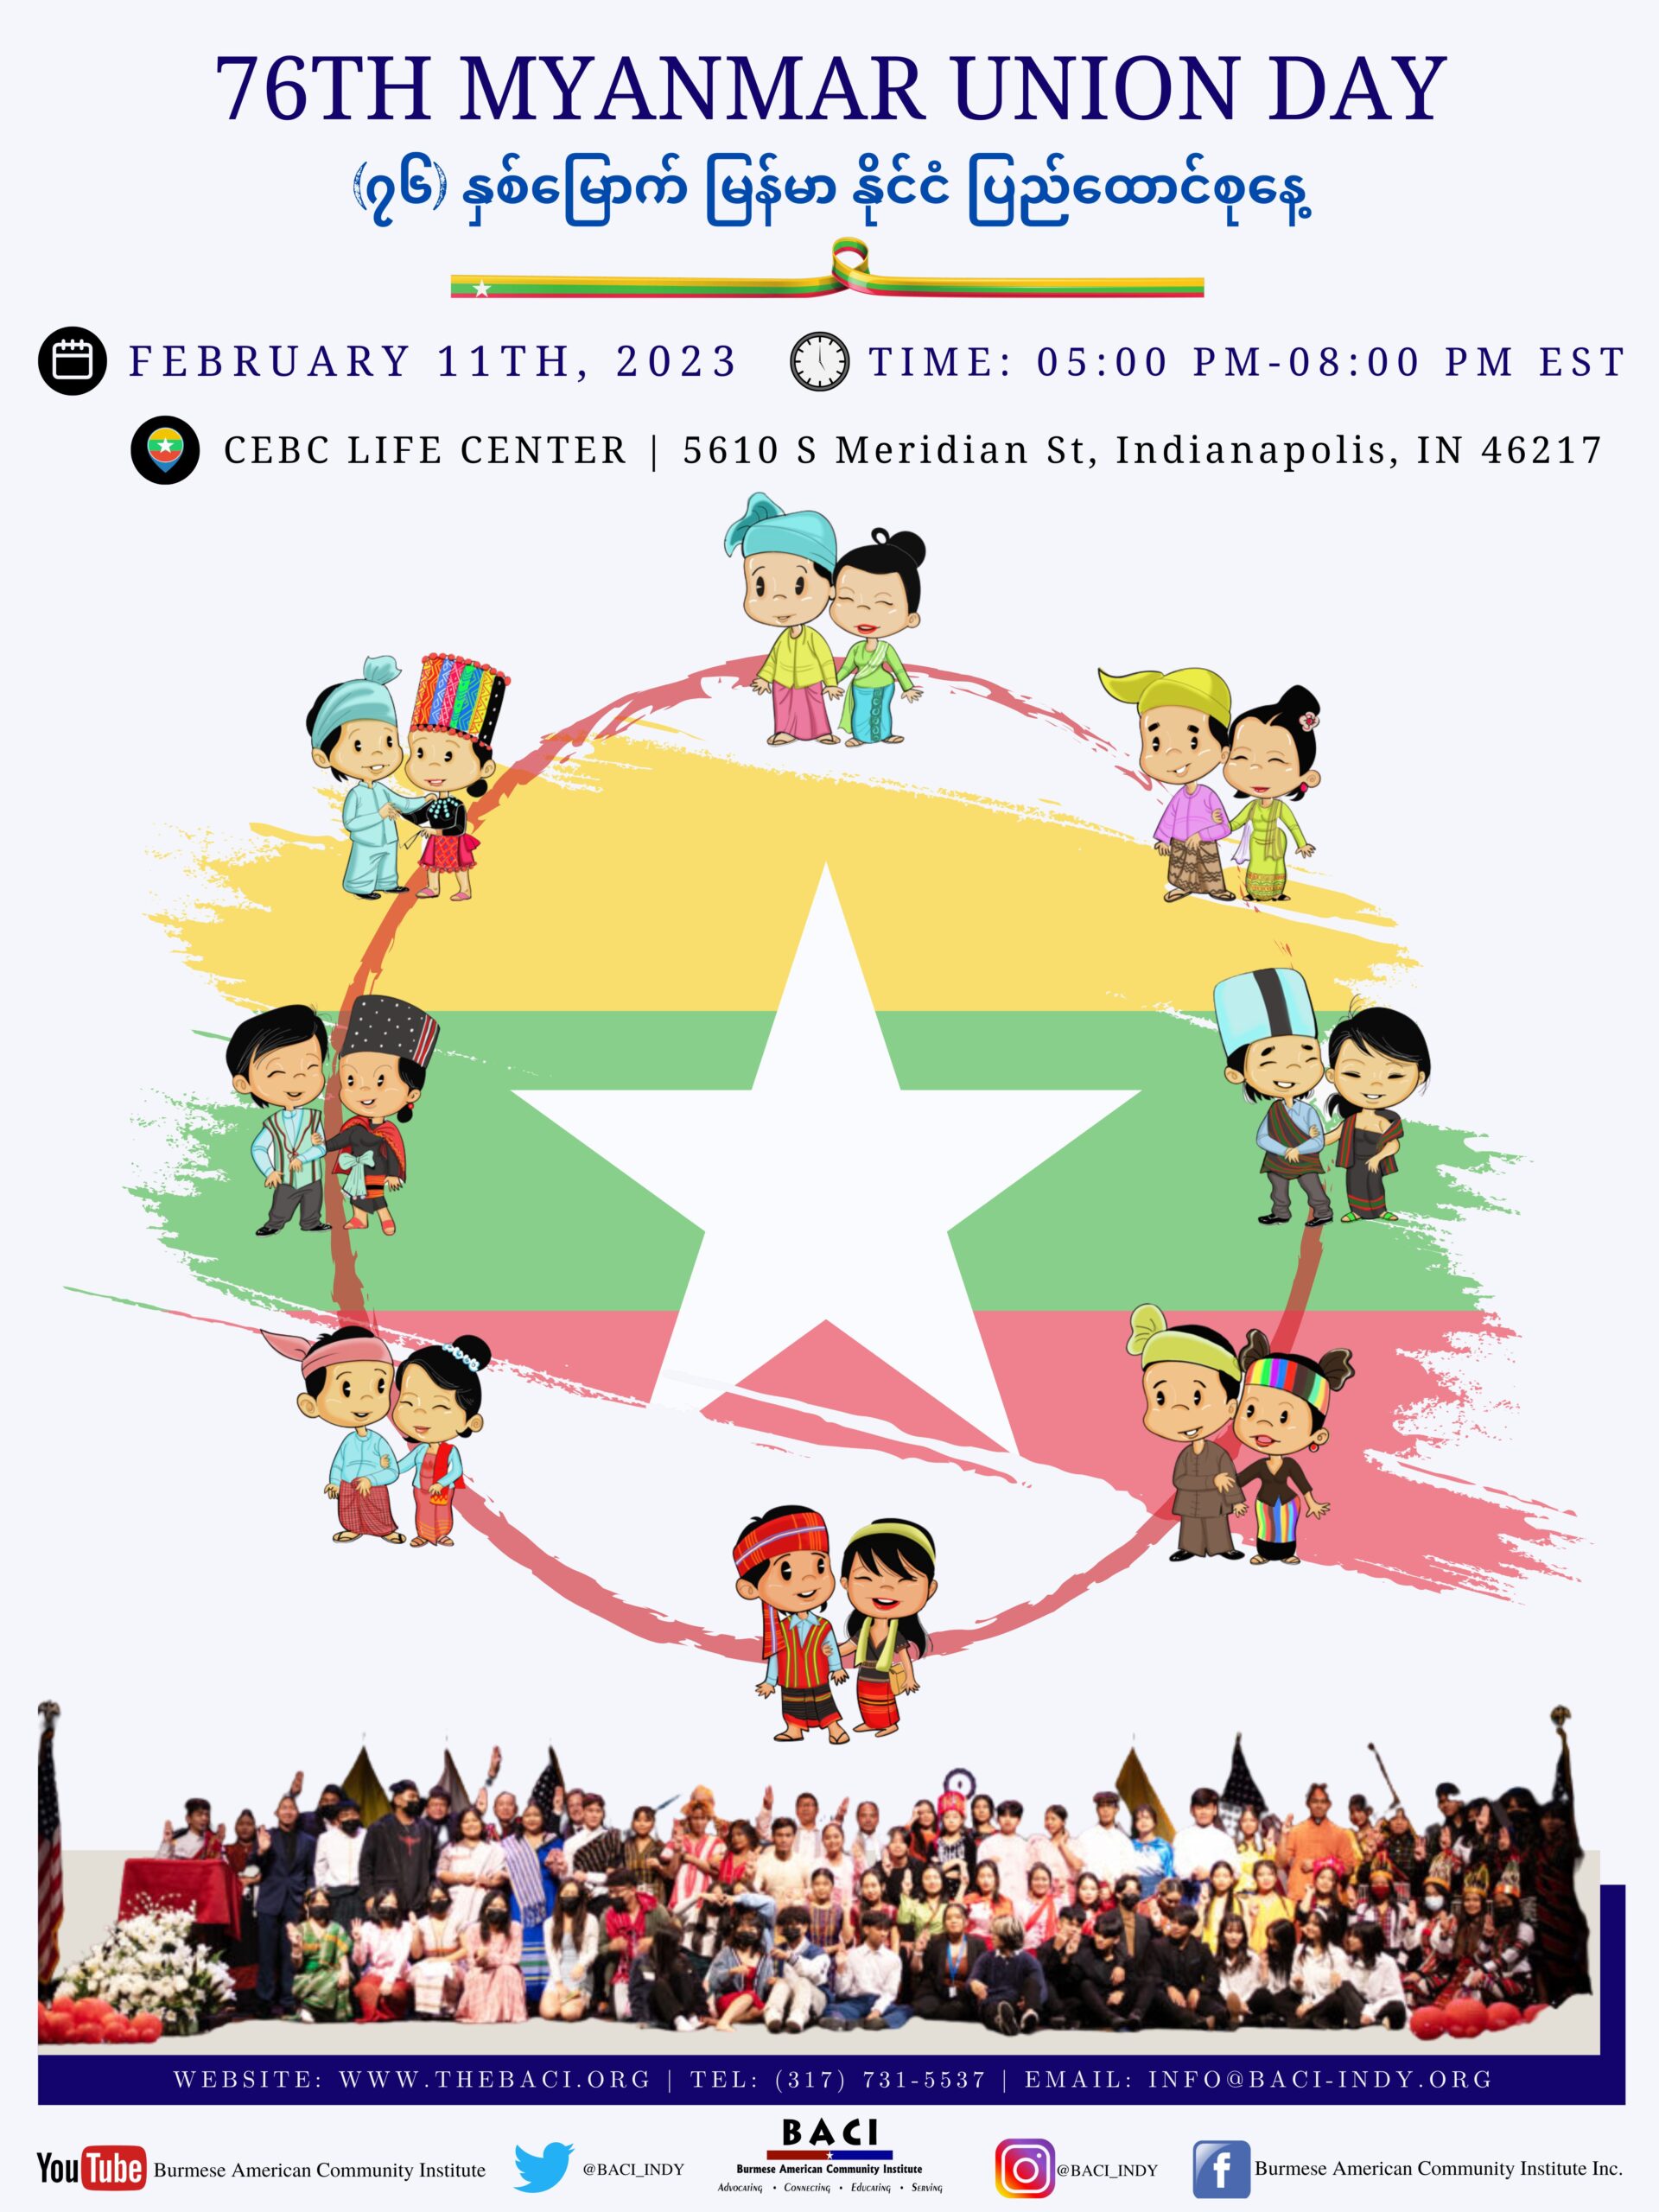 Register for Myanmar Union Day 2023 Feb 11 The official website of